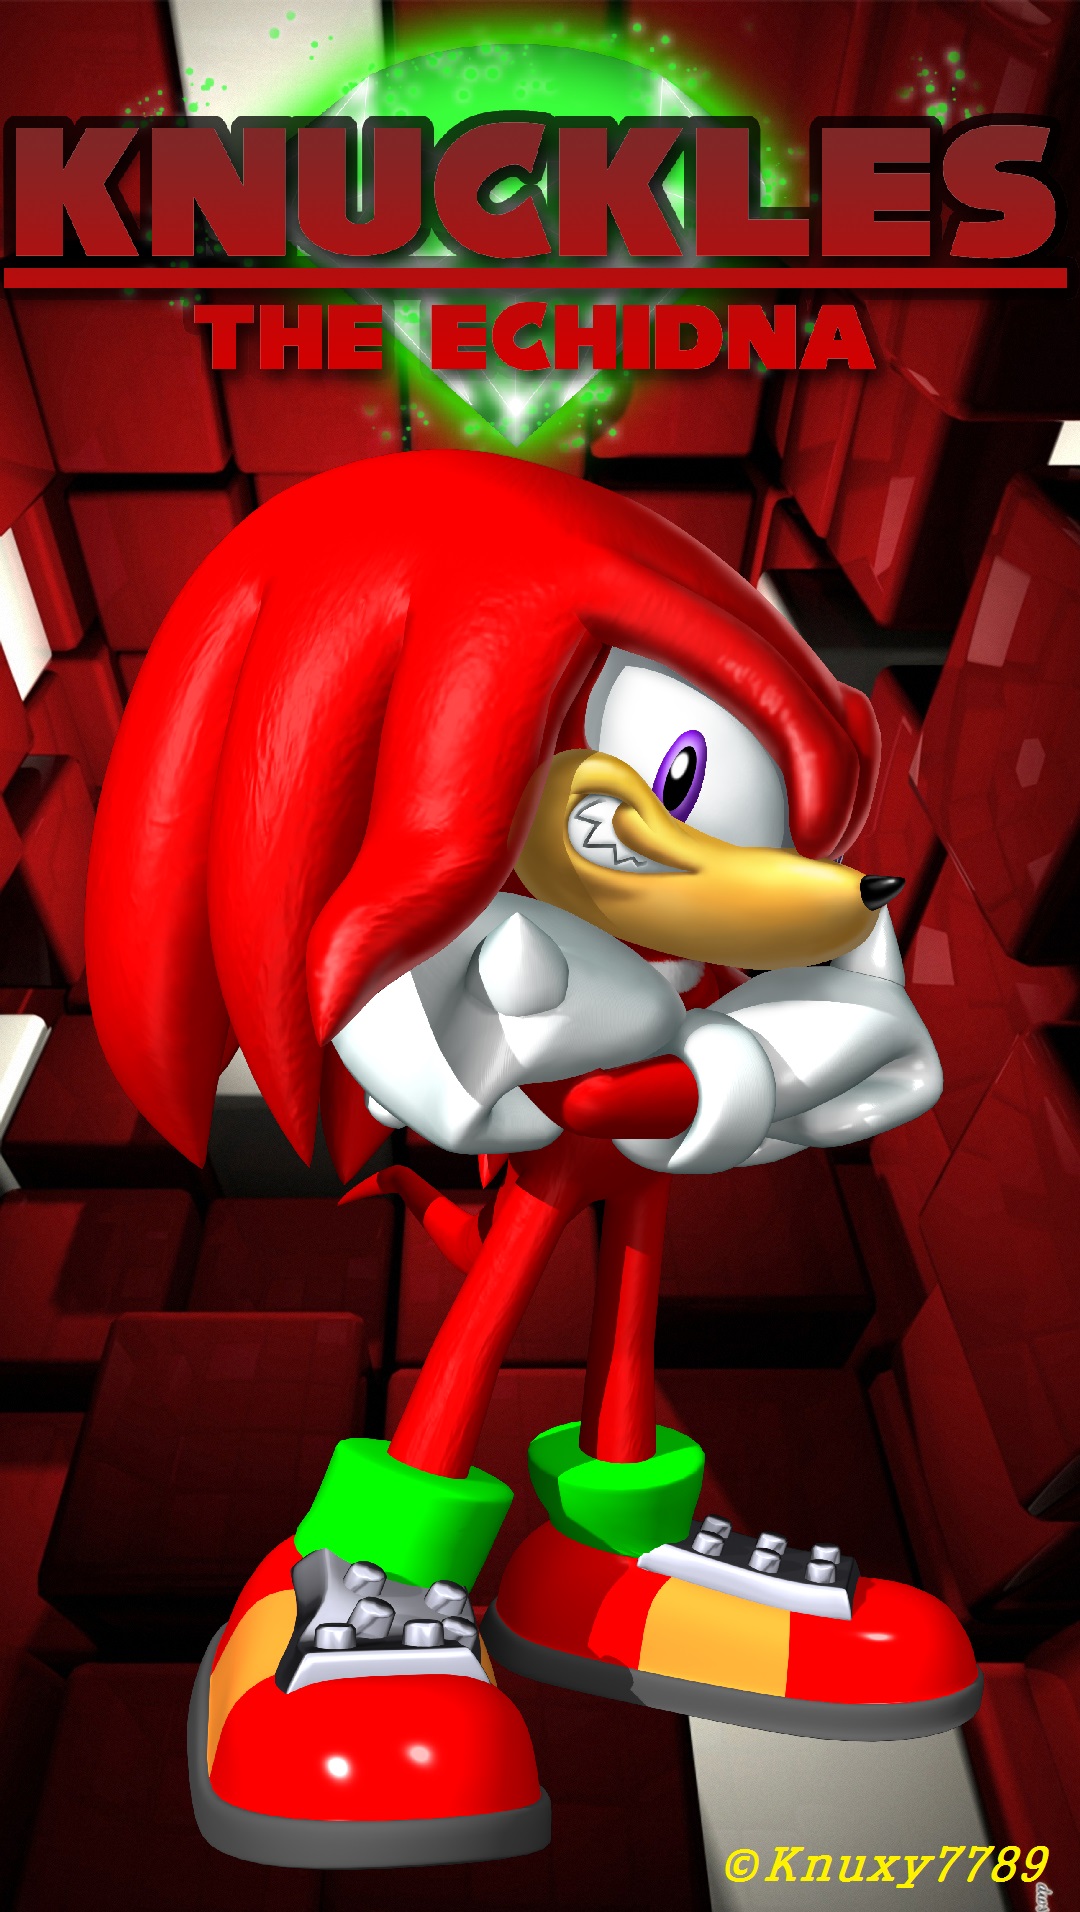 Knuckles the Echidna - Iphone Wallpaper by Knuxy7789 on DeviantArt